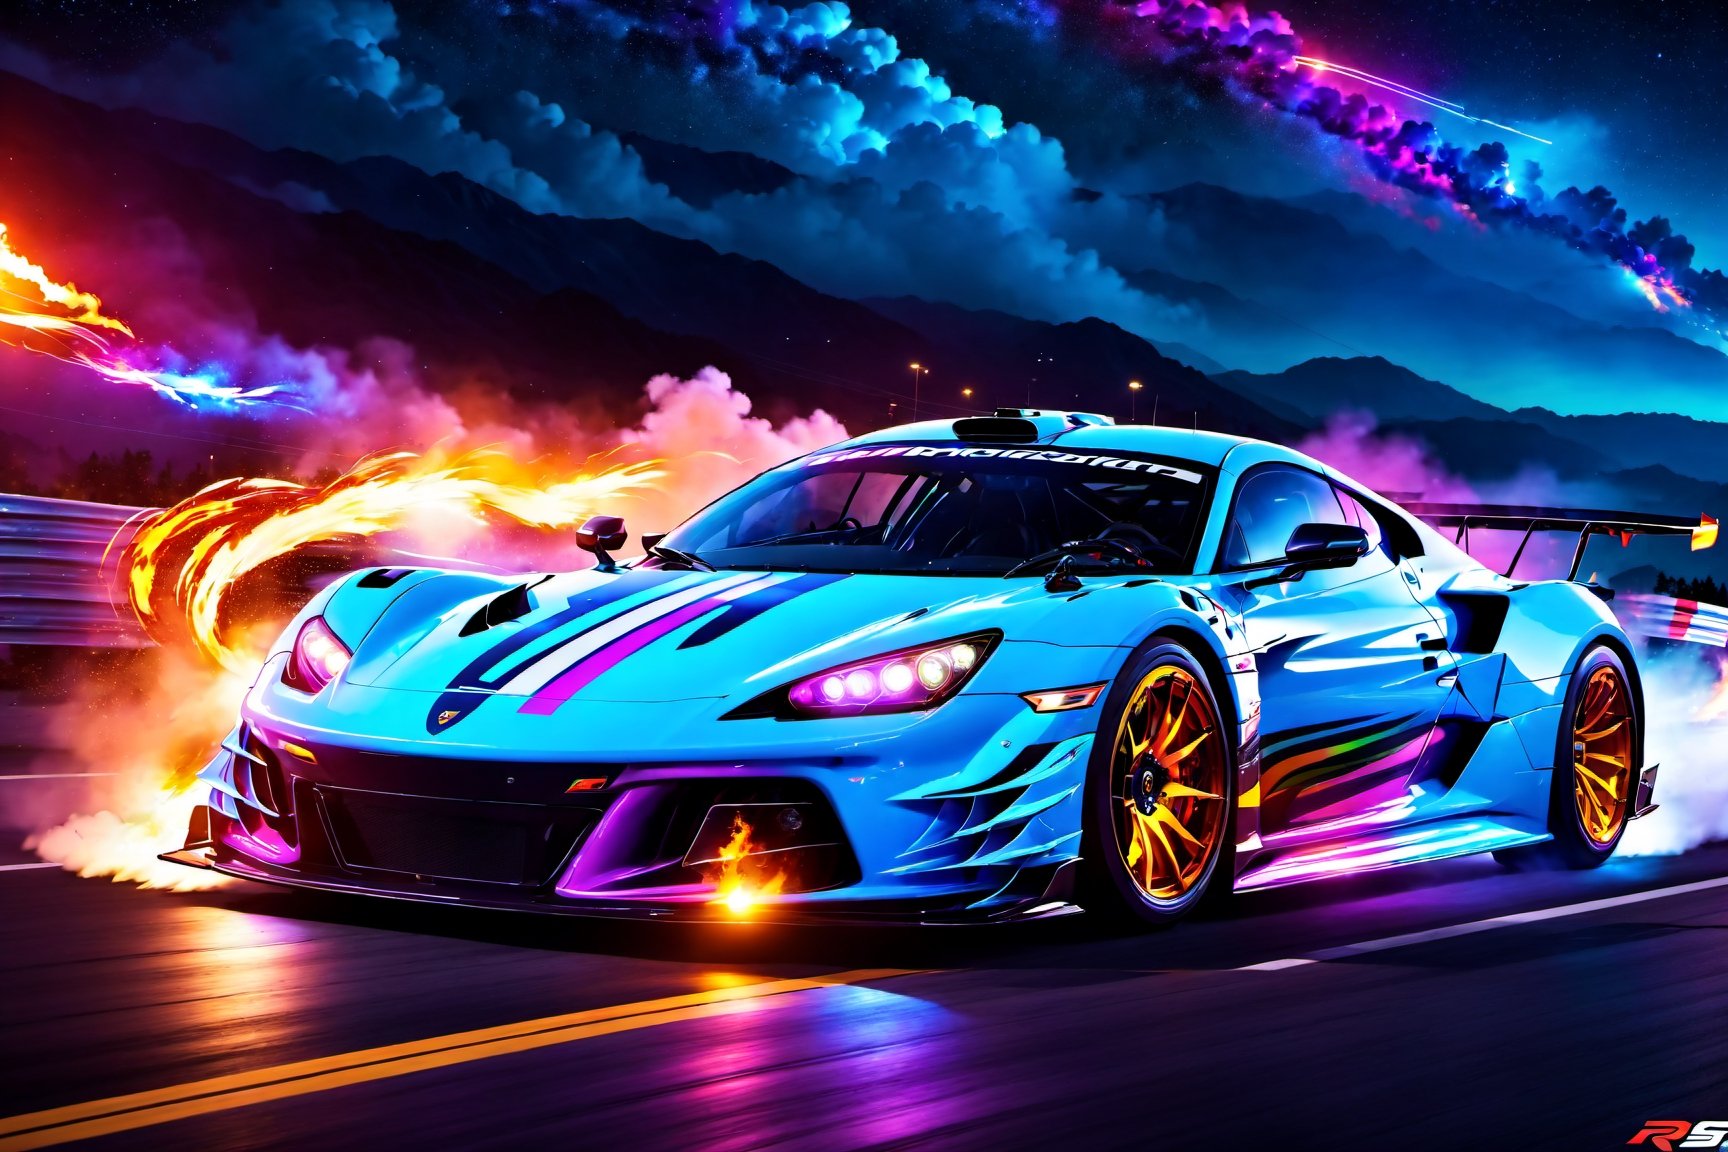 angelic sports car, blue and white colors, bright sky, colorful beautiful mountain, sharp, clouds, detailed car body ,ethereal art, detailed tires, fire scene, more detail, (masterpiece, best quality, ultra-detailed, 8K), race car, street racing-inspired,Drifting inspired, LED, ((Twin headlights)), (((Bright neon color racing stripes))), (Black racing wheels), Wheelspin showing motion, Show car in motion, Burnout,  wide body kit, modified car,  racing livery, masterpiece, best quality, realistic, ultra highres, (((depth of field))), (full dual colour neon lights:1.2), (hard dual color lighting:1.4), (detailed background), (masterpiece:1.2), (ultra detailed), (best quality), intricate, comprehensive cinematic, magical photography, (gradients), glossy, Night with galaxy sky, Fast action style, fire out of tail pipes, Sideways drifting in to a turn, Neon galaxy metalic paint with race stripes, GTR Nismo, NSX, Porsche, Lamborghini, Ferrari, Bugatti, Ariel Atom, BMW, Audi, Mazda, Toyota supra, Lamborghini Aventador,  aesthetic,intricate, realistic,cinematic lighting, Neon Paint, streaks of fire,c_car,more detail XL,mecha,Concept Cars,DonMPl4sm4T3chXL ,Sexy,vaporwave style,Comic Book-Style 2d,spcrft,3d toon style